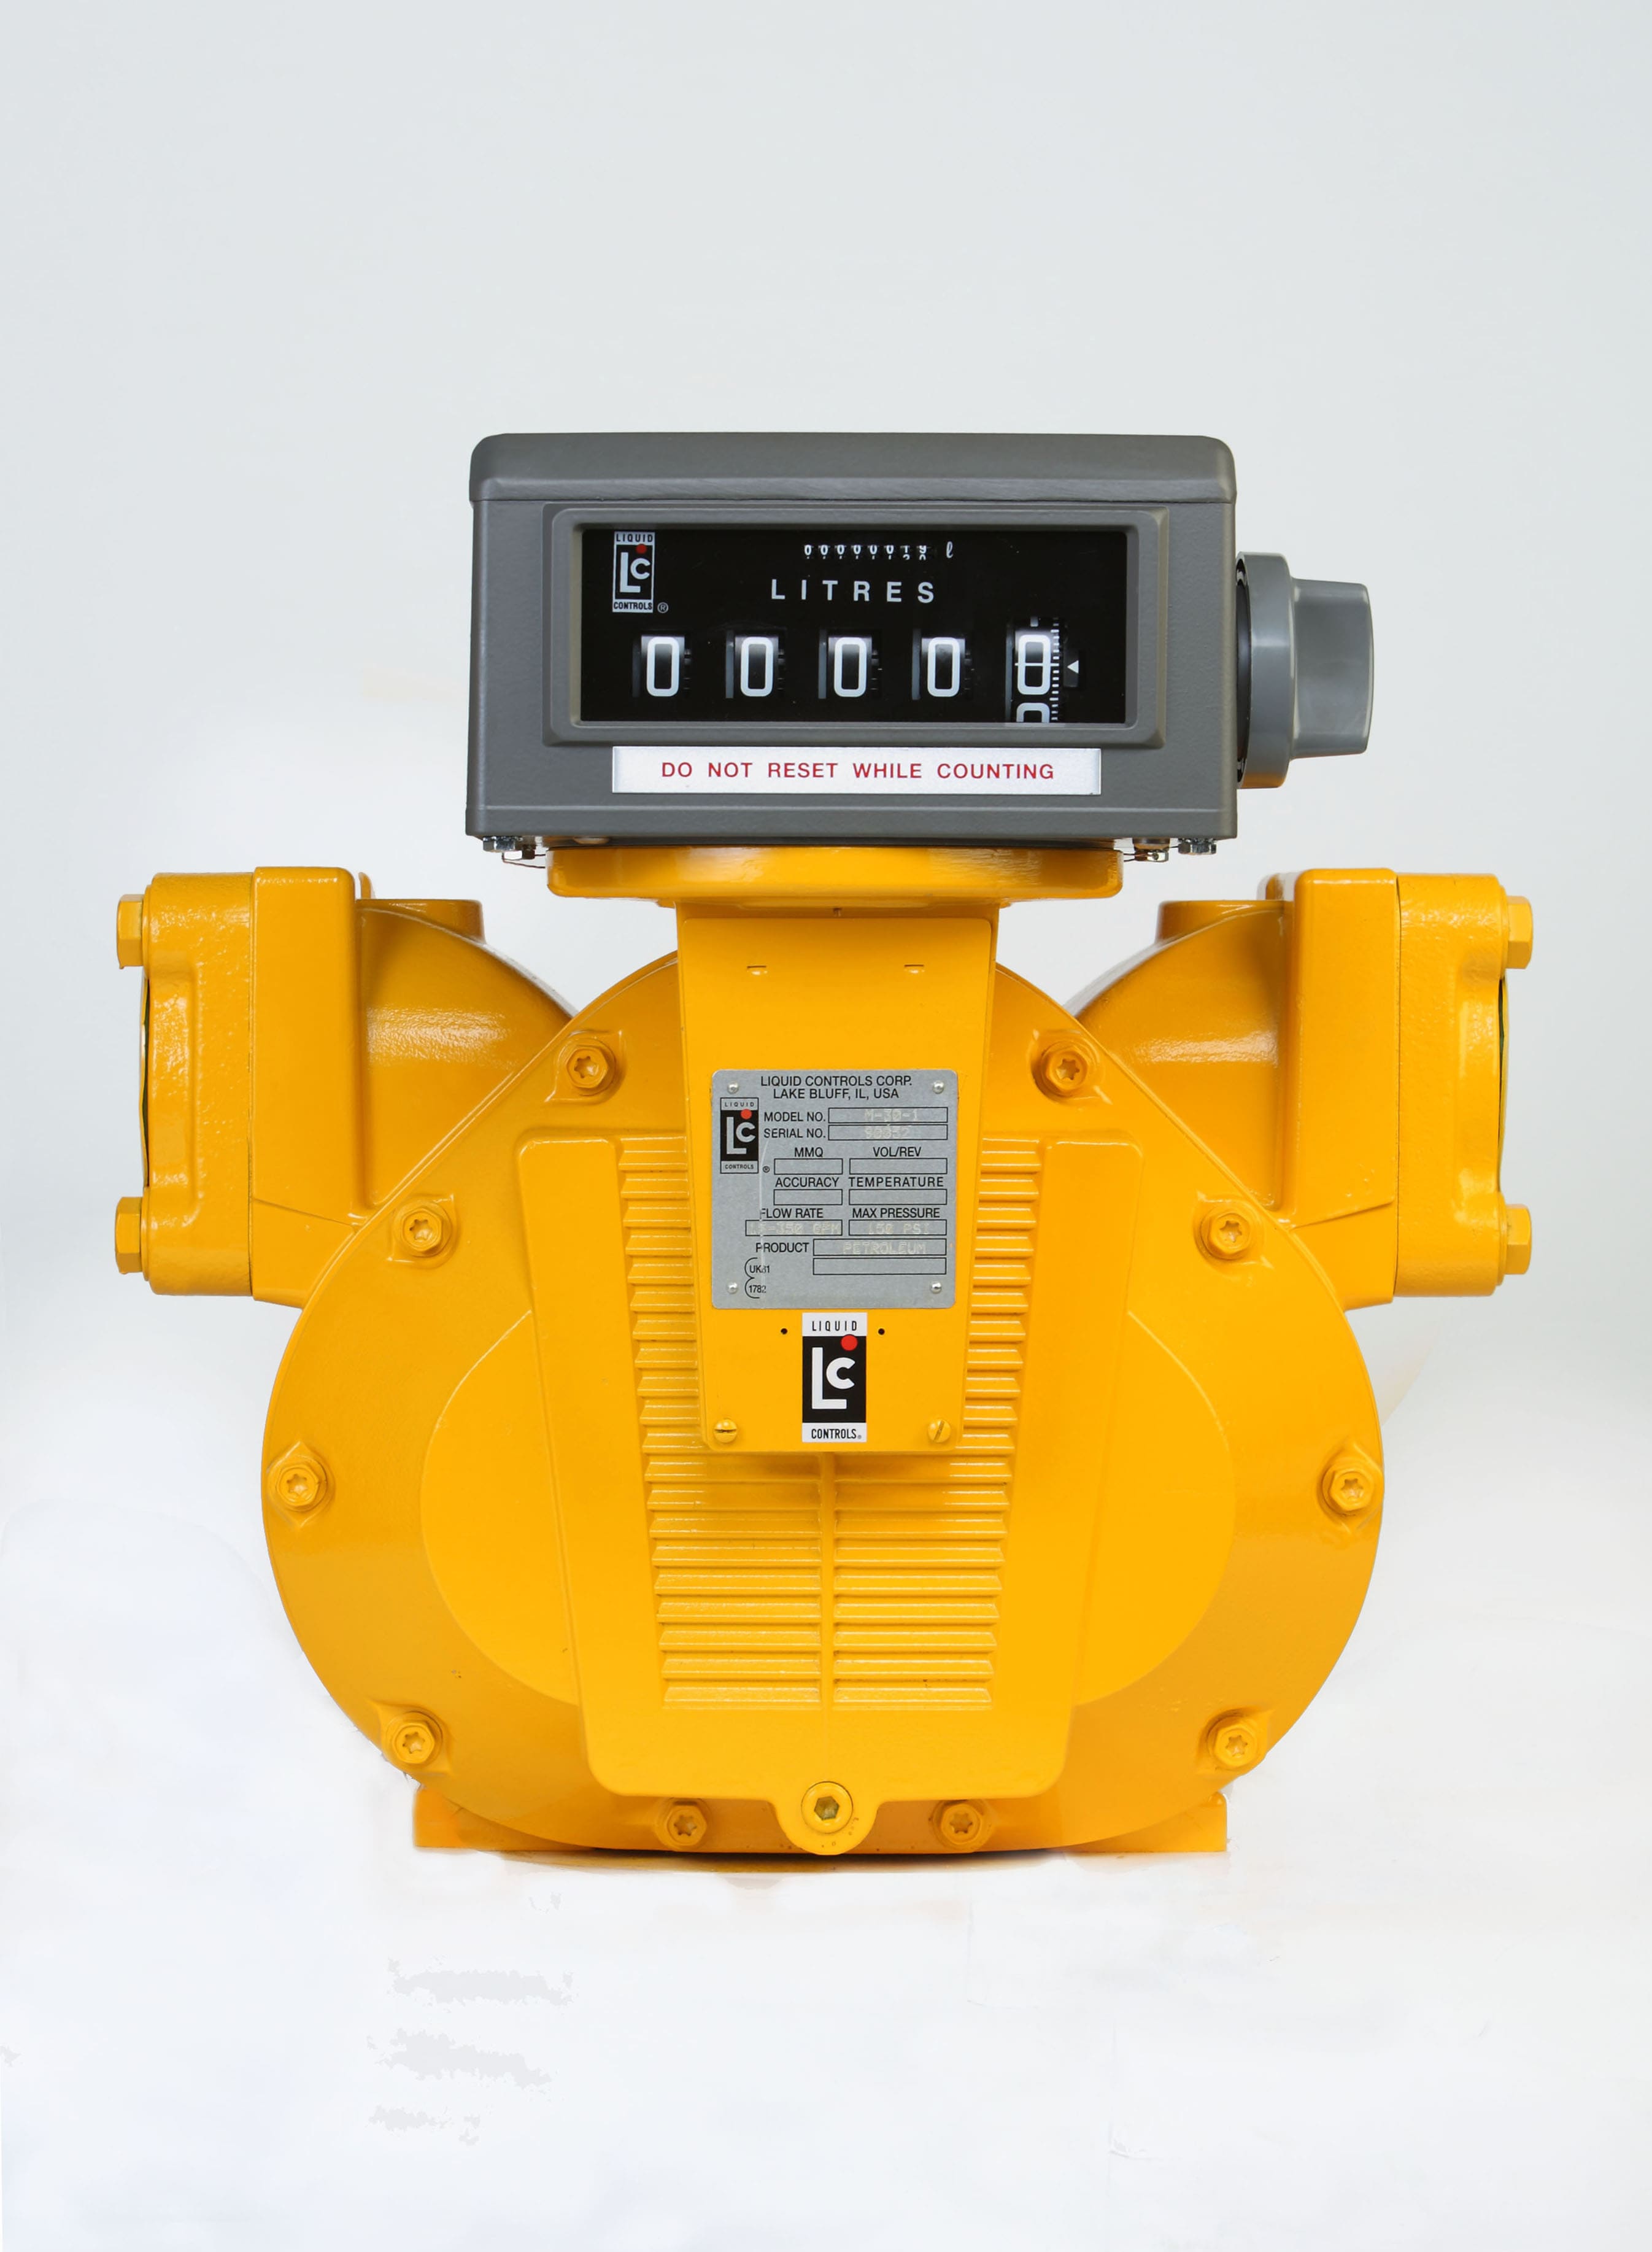 Meter with POD